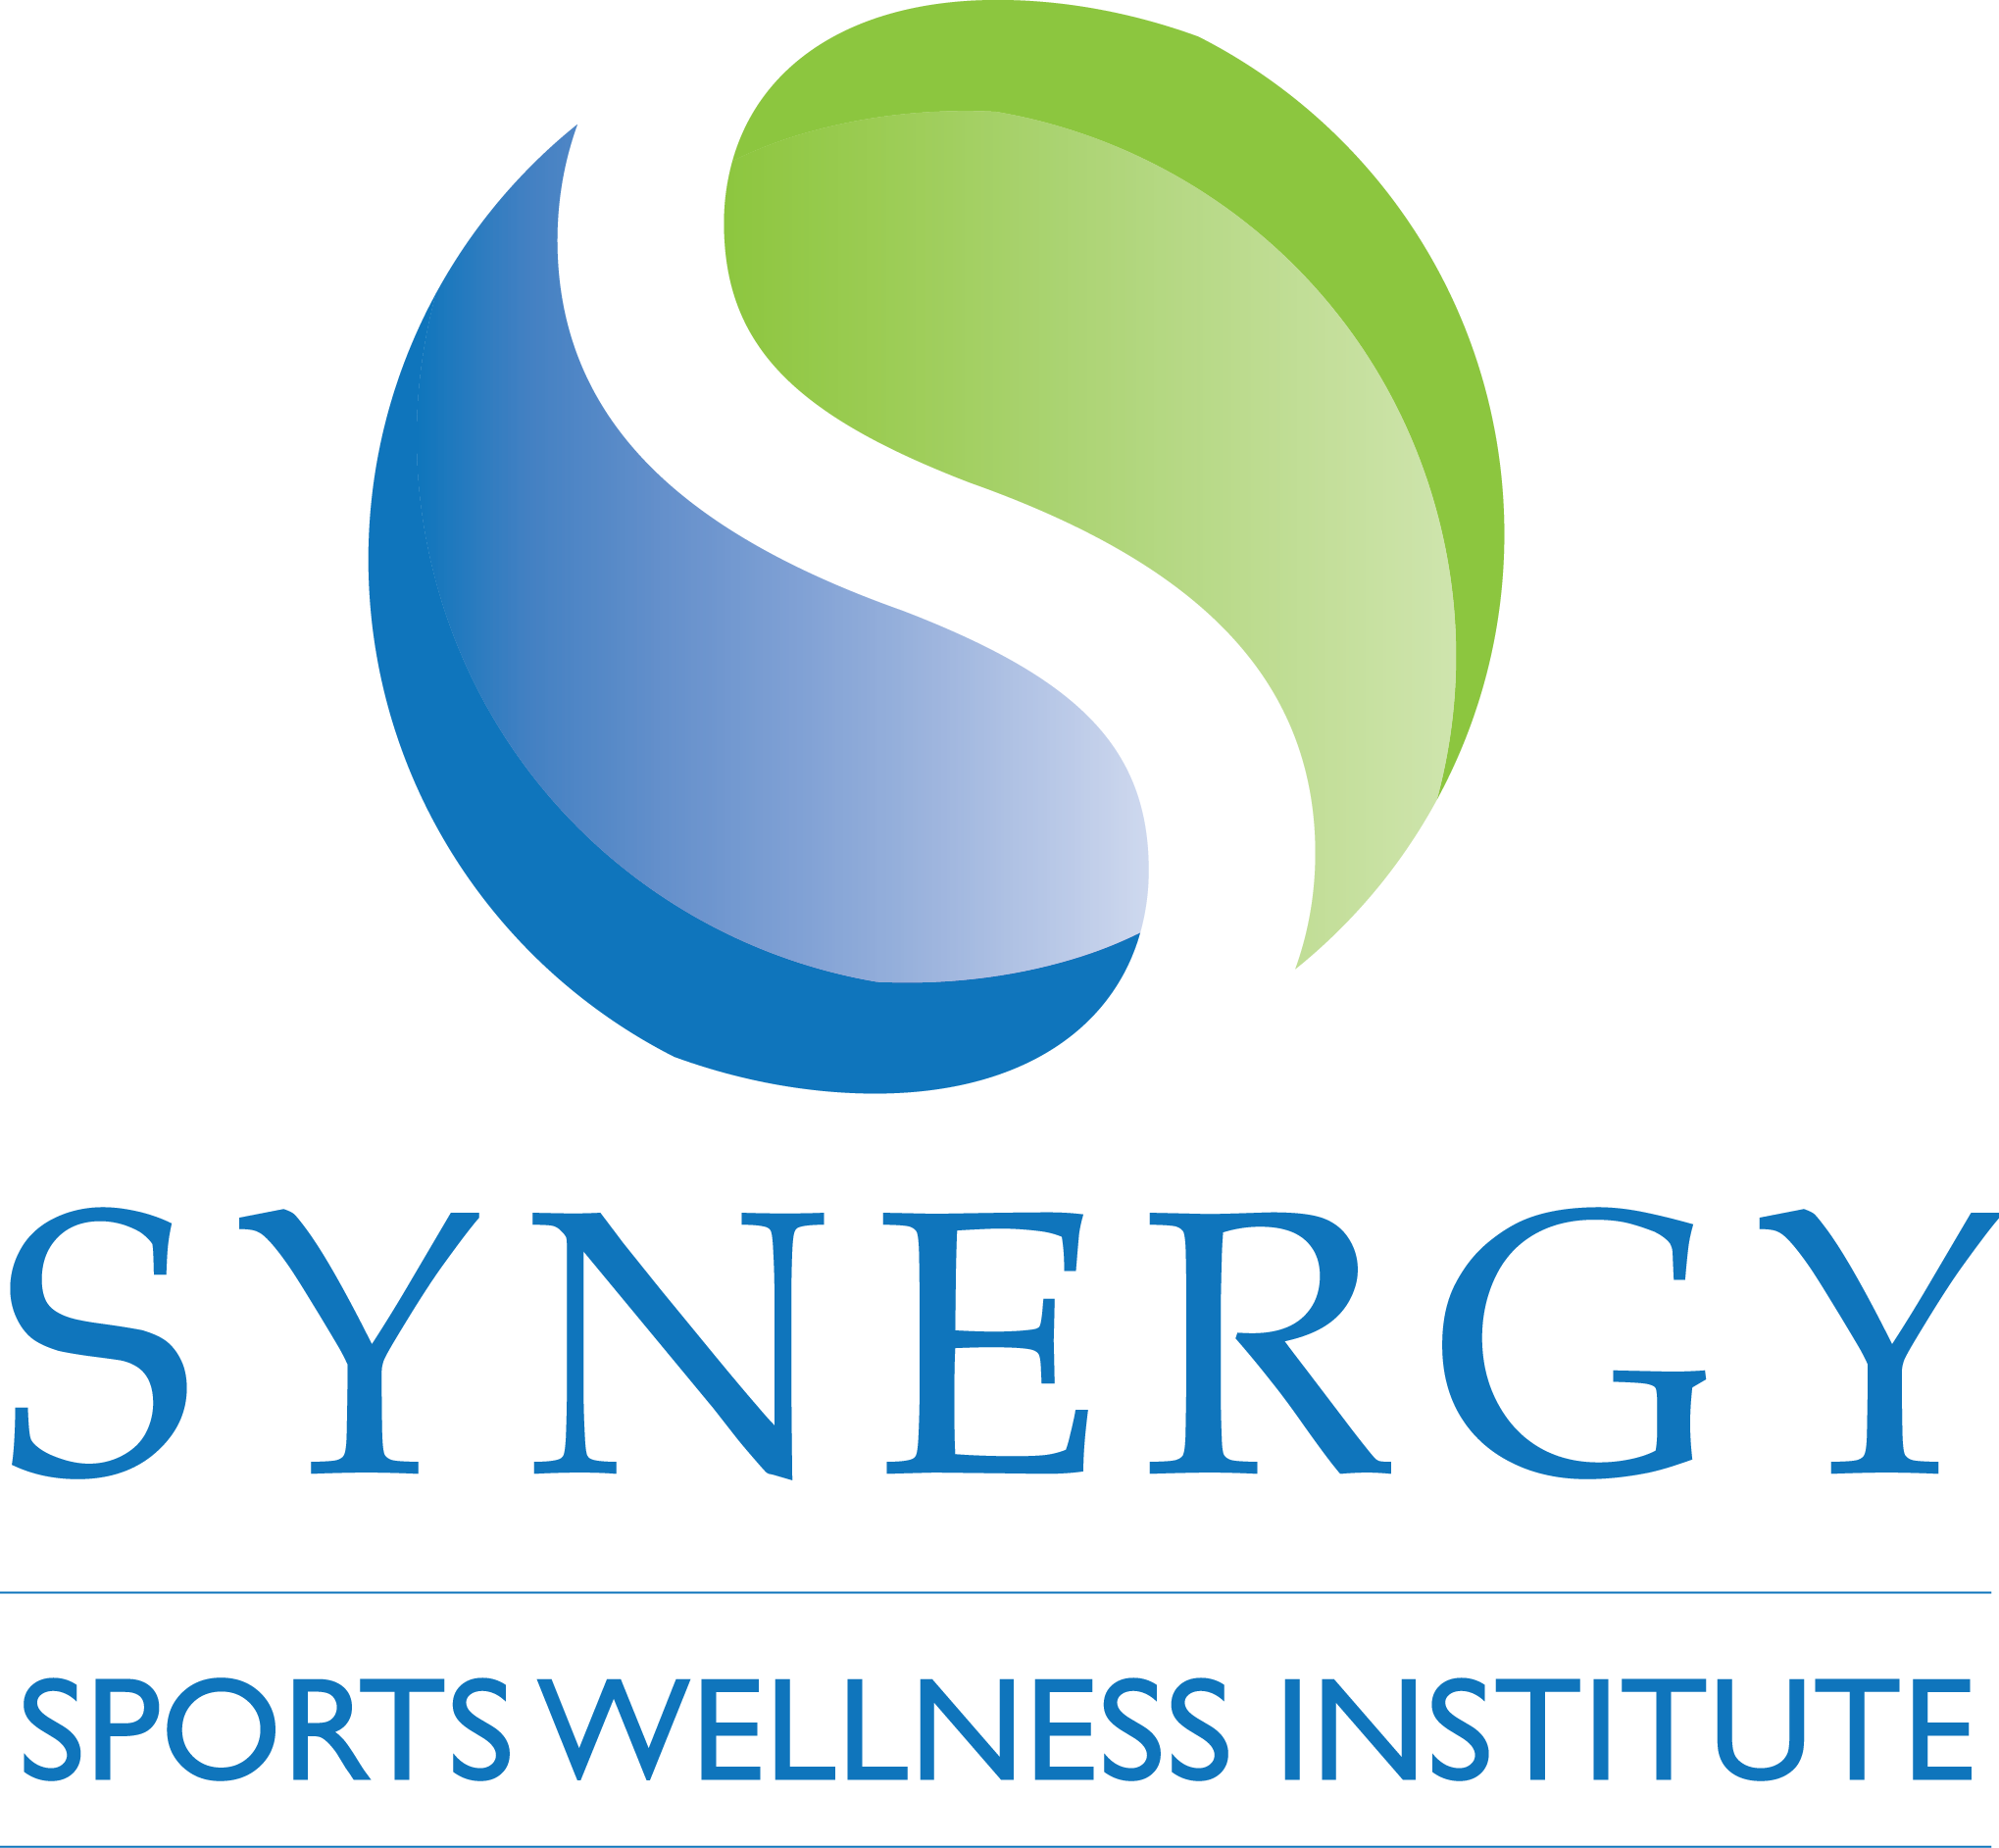 Synergy Sports Wellness Institute Opens New Offices in Atlanta/Buckhead